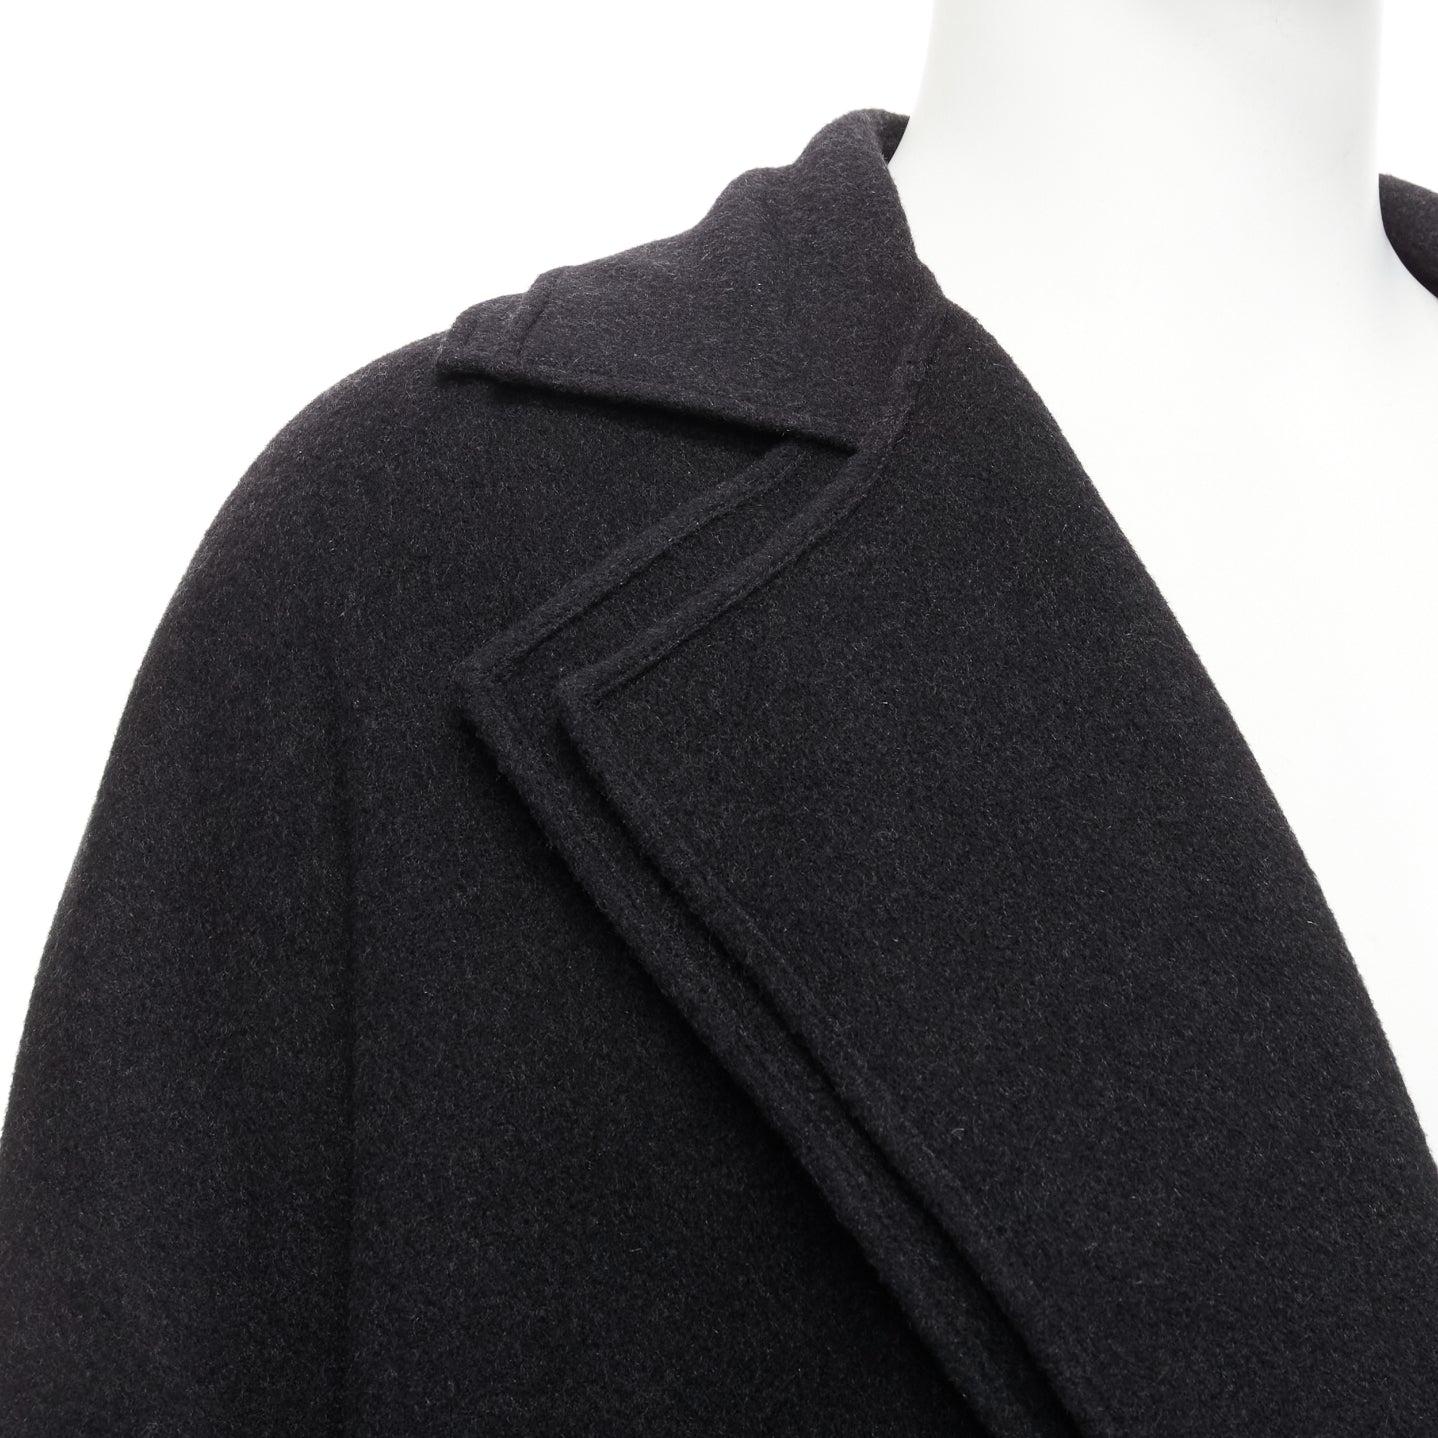 HERMES Vintage dark grey double faced cashmere dual collar belted robe coat EU48 M
Reference: TGAS/D01011
Brand: Hermes
Material: Cashmere
Color: Grey
Pattern: Solid
Closure: Belt
Lining: Grey Cashmere
Made in: France

CONDITION:
Condition: